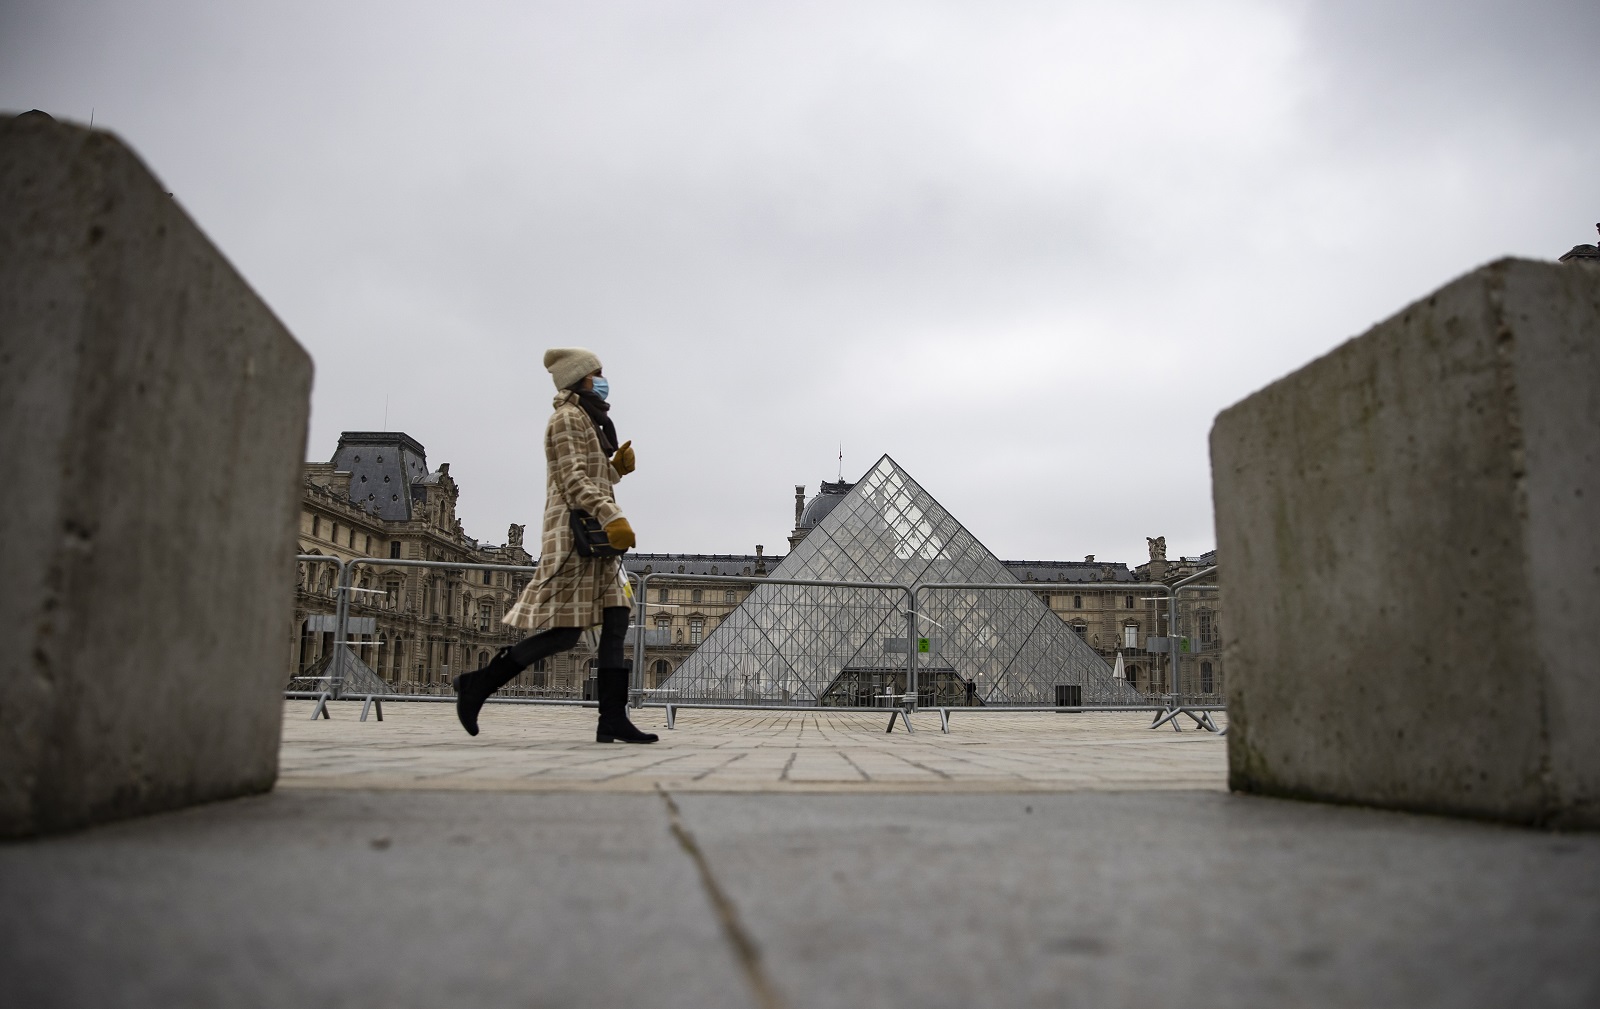 epa08924850 Metal barriers block the access to the pyramids of the Louvre museum in Paris, France, 07 January 2021. Cultural sites including museums, cinemas and theatres were originally due to reopen on 07 January 2021 after shutting on 28 October 2020 as part of the second lockdown, but the government decided to put the reopening plans on hold due to the surge in covid-19 cases.  EPA/IAN LANGSDON